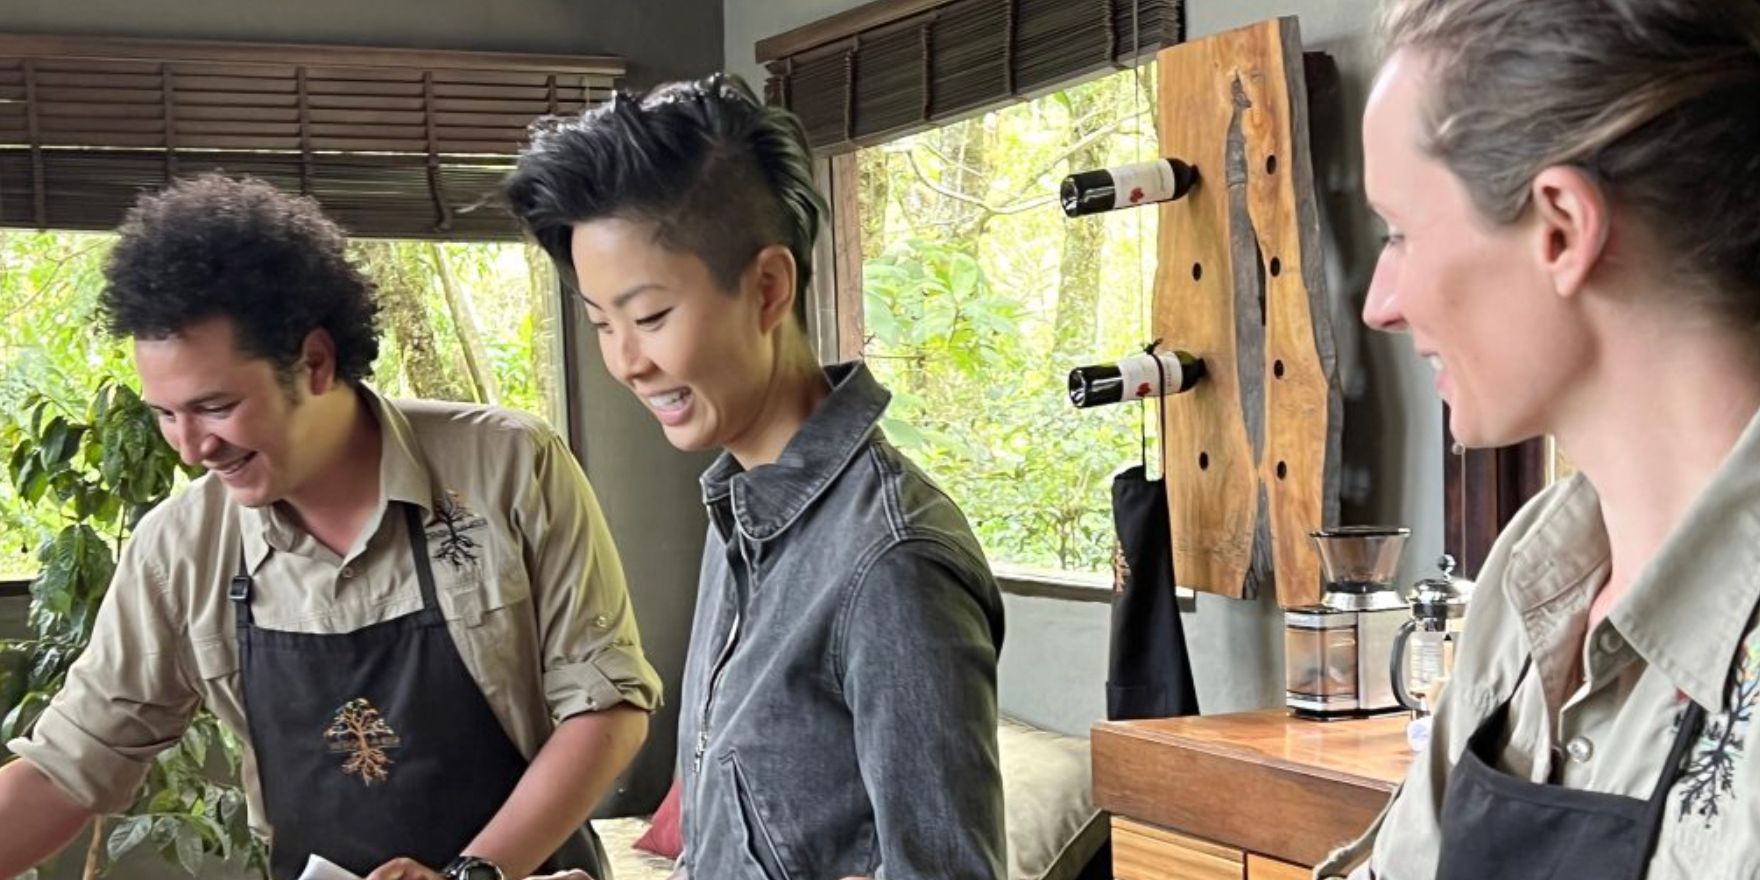 Kristen Kish in the kitchen with two chefs in Restaurants at the End of the World